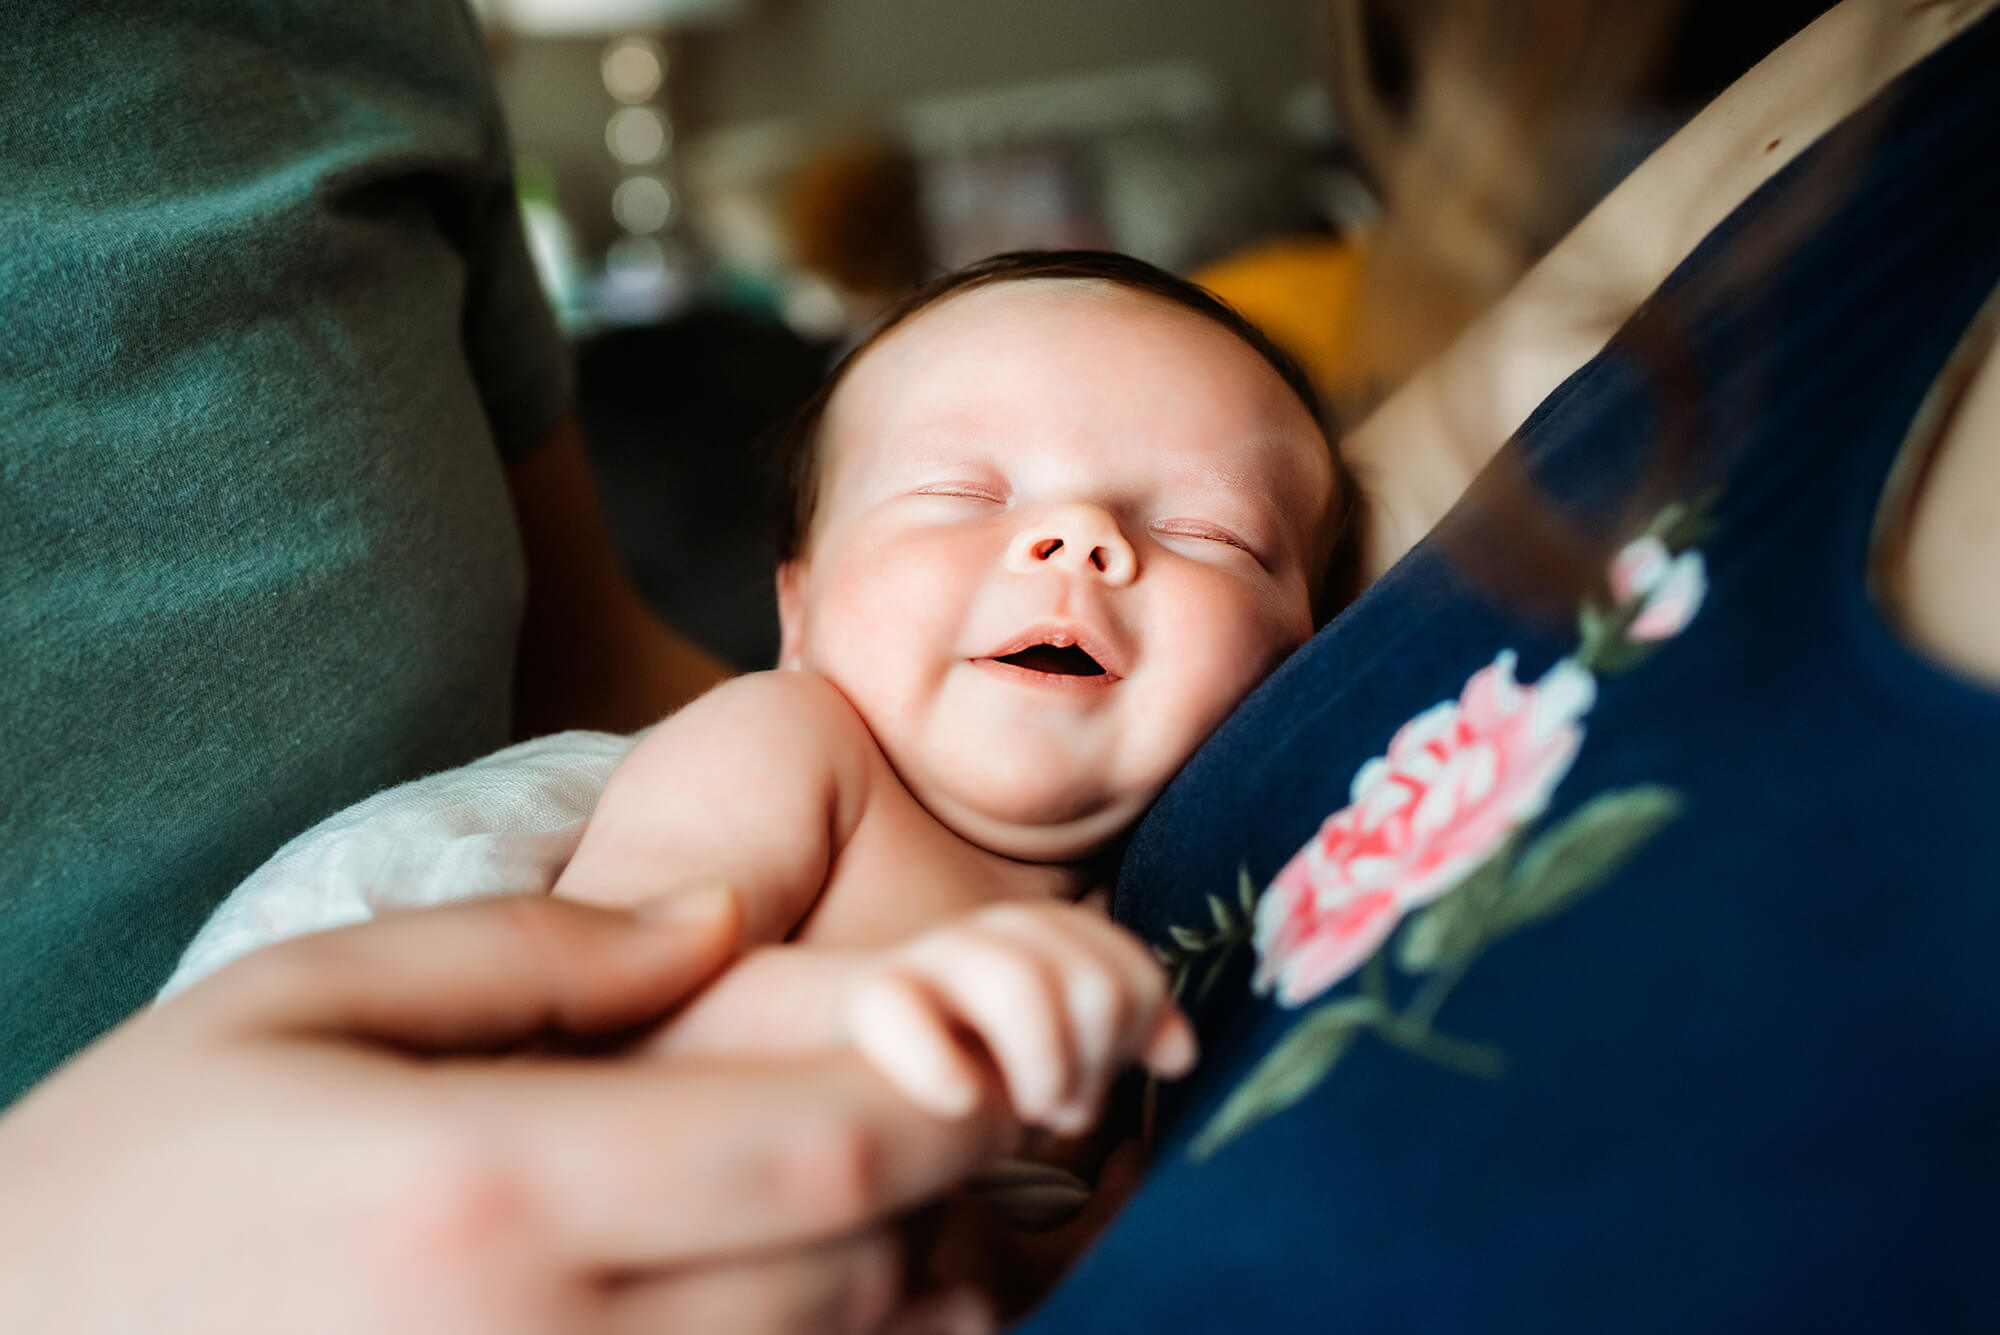 Overland Park newborn photographer captures baby smiling in parents arms as they baby sleeps